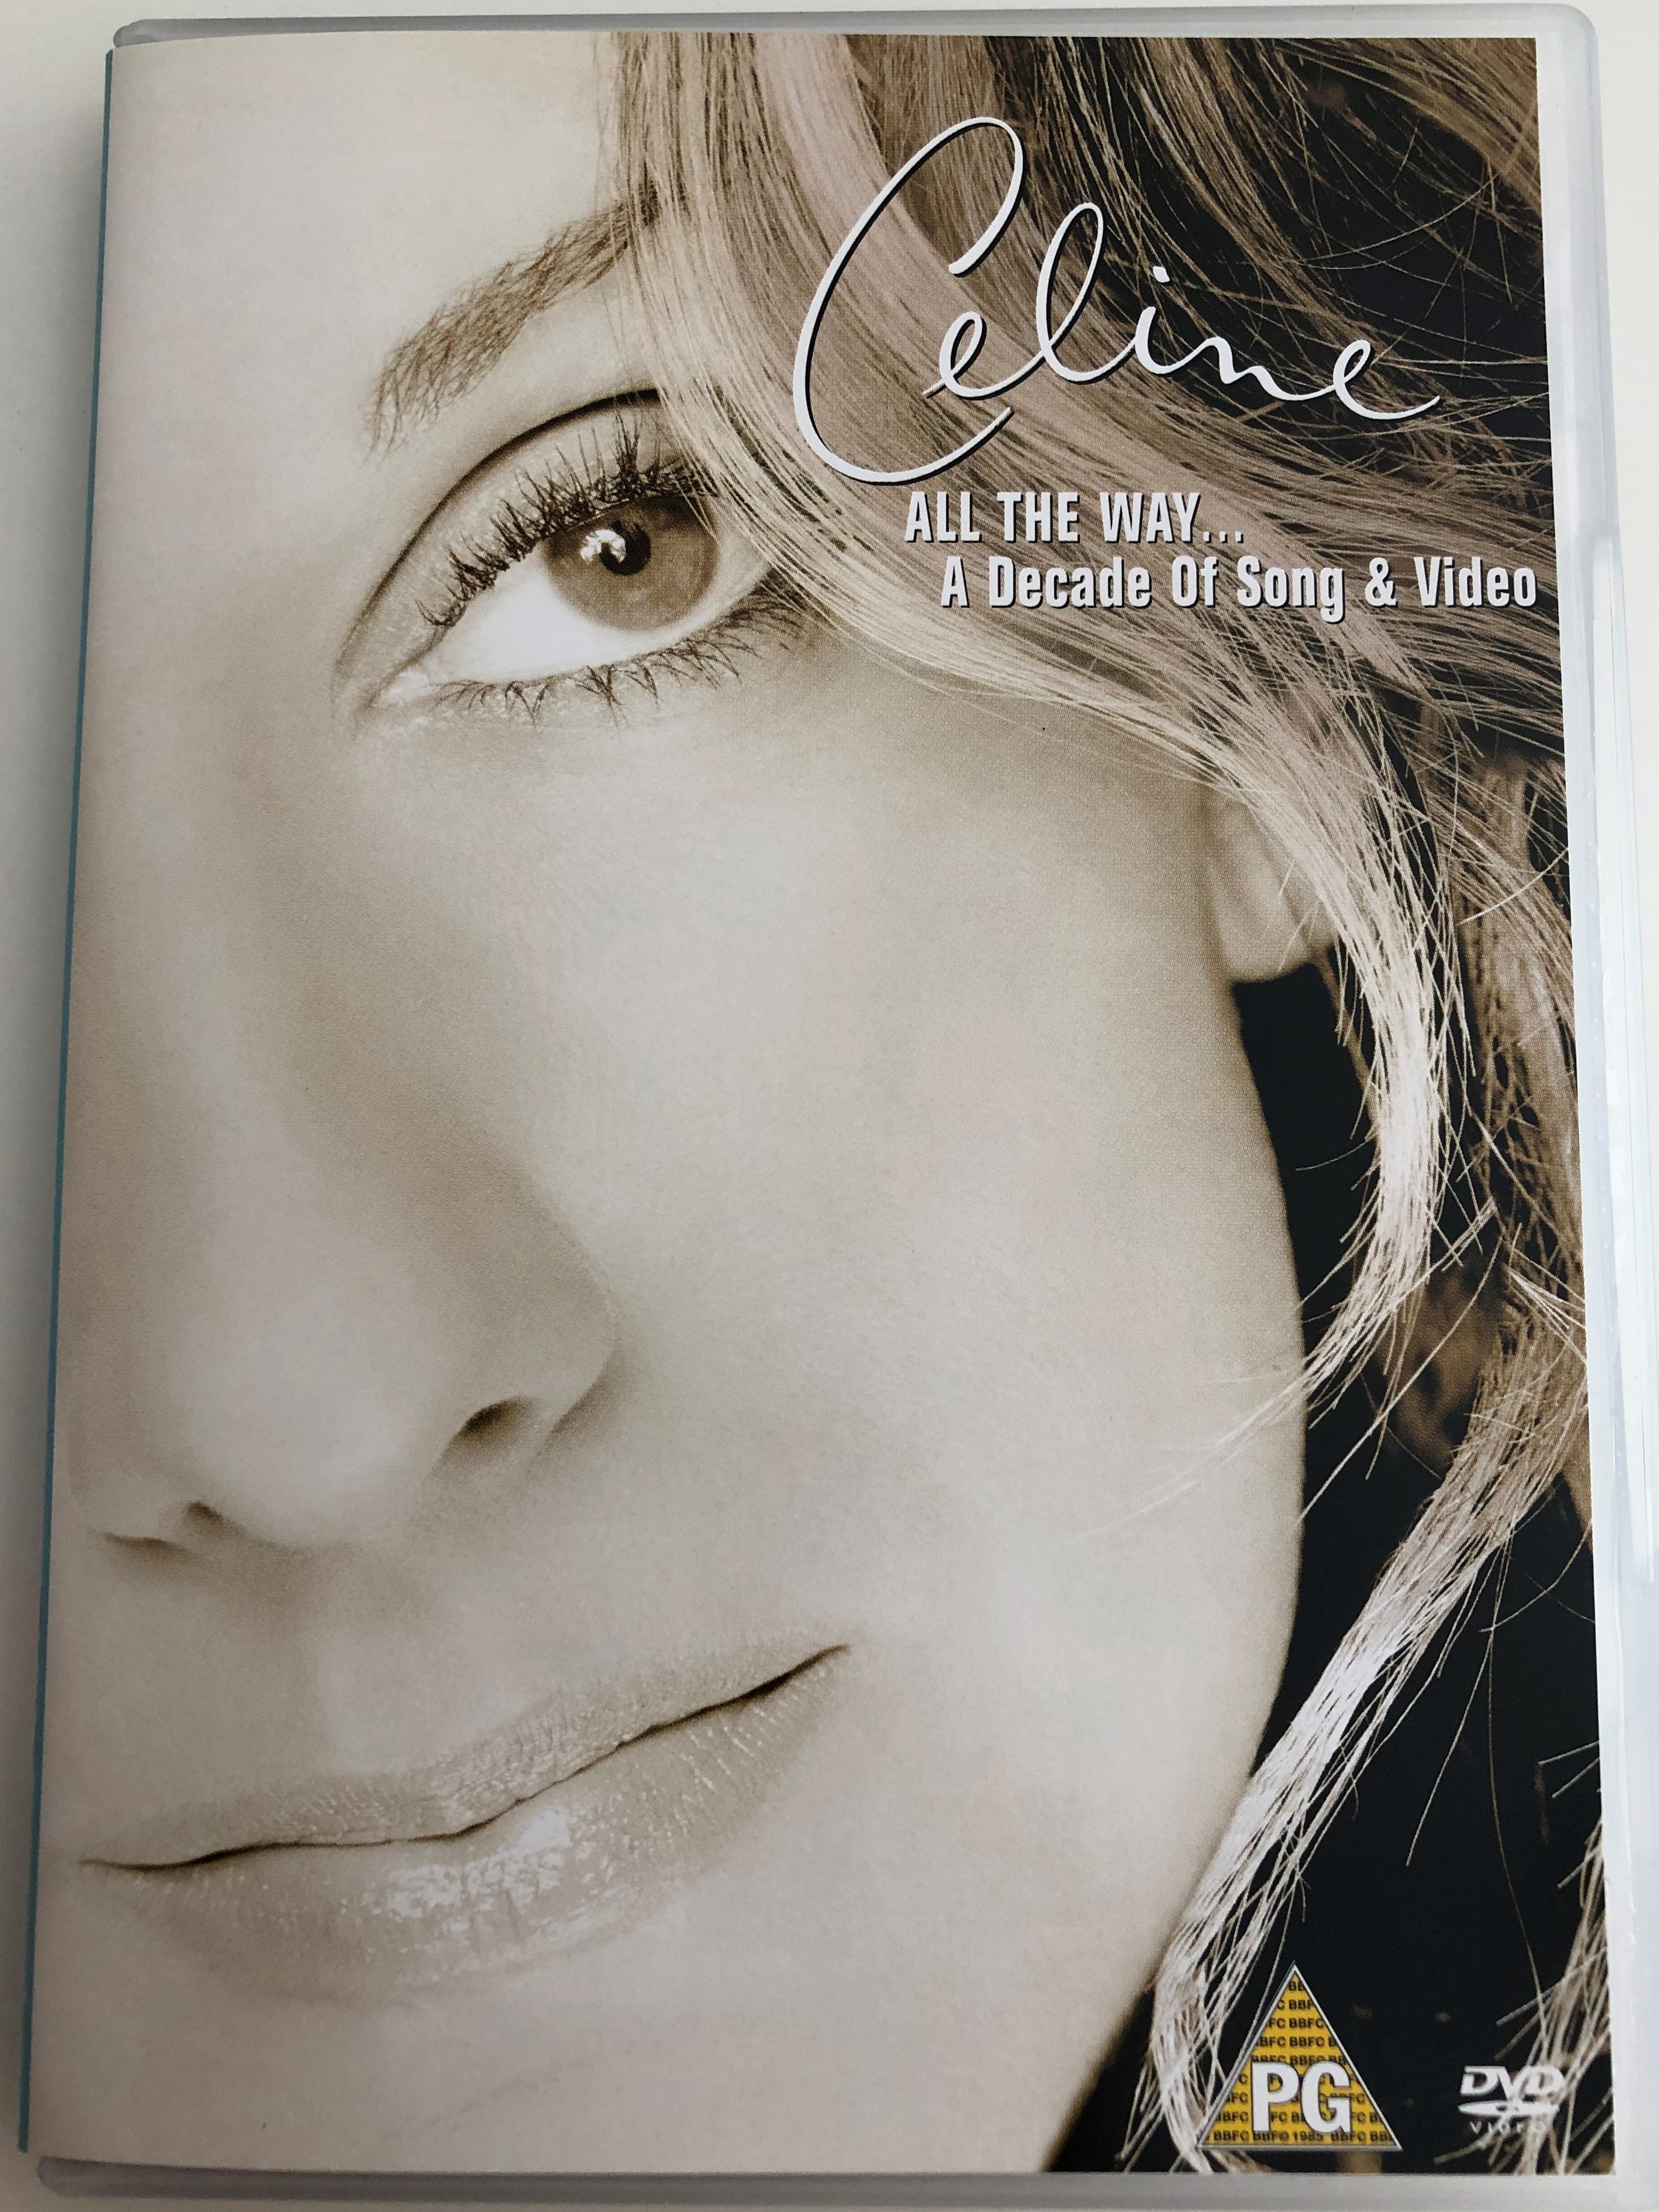 celine-dion-all-the-way-dvd-2000-a-decade-of-song-video-sony-music-50229-9-1-.jpg